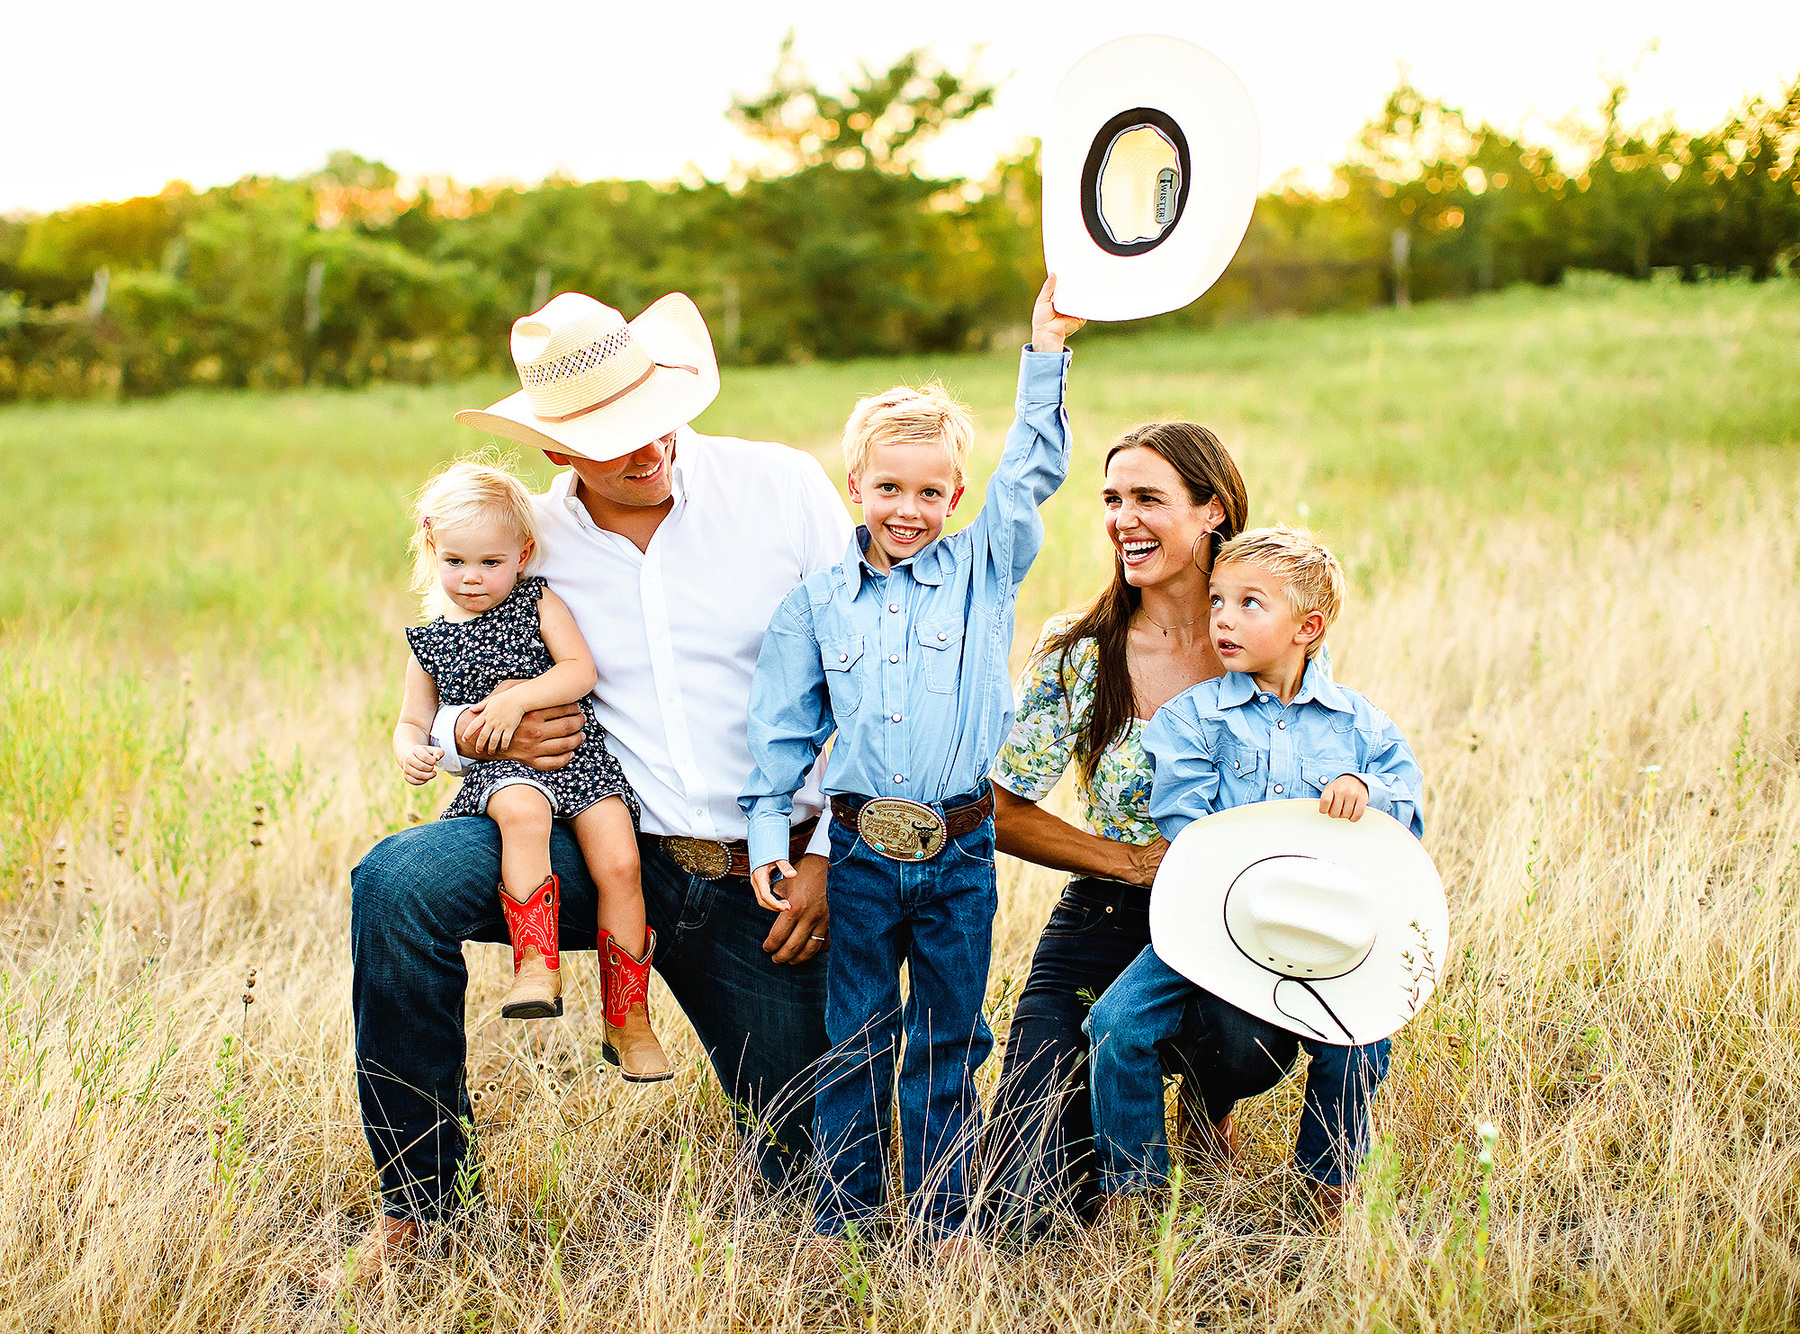 dutton_dripping_springs_family_photographer-190_copy.jpg